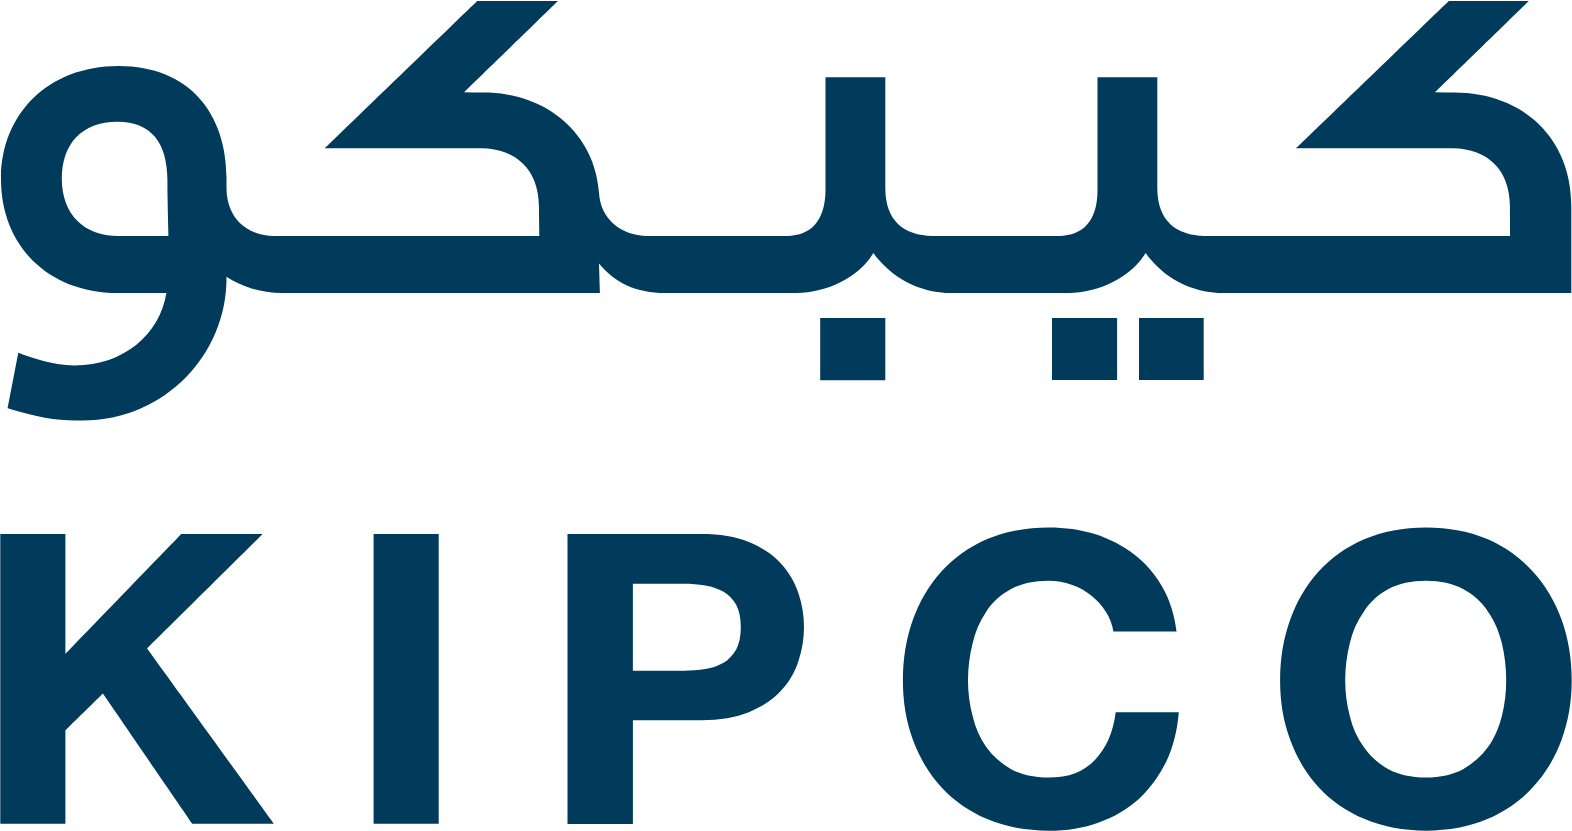 Kuwait Projects Company Holding logo large (transparent PNG)